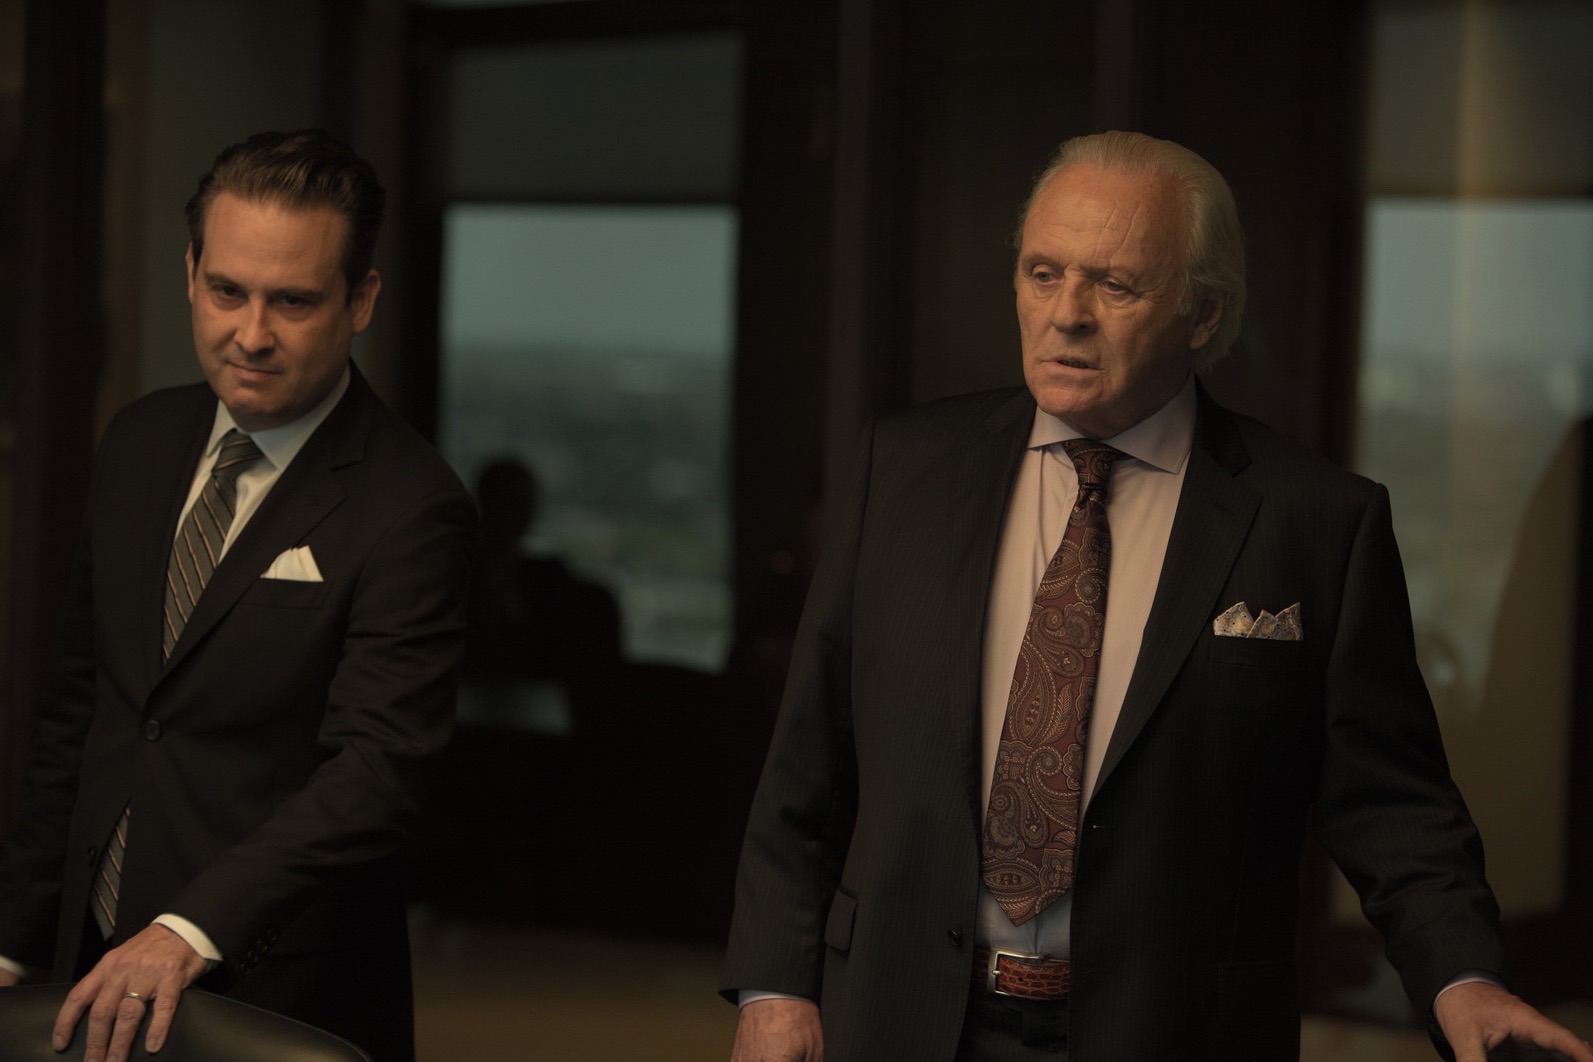 As Jake Coburn in Beyond Deceit with costar Anthony Hopkins